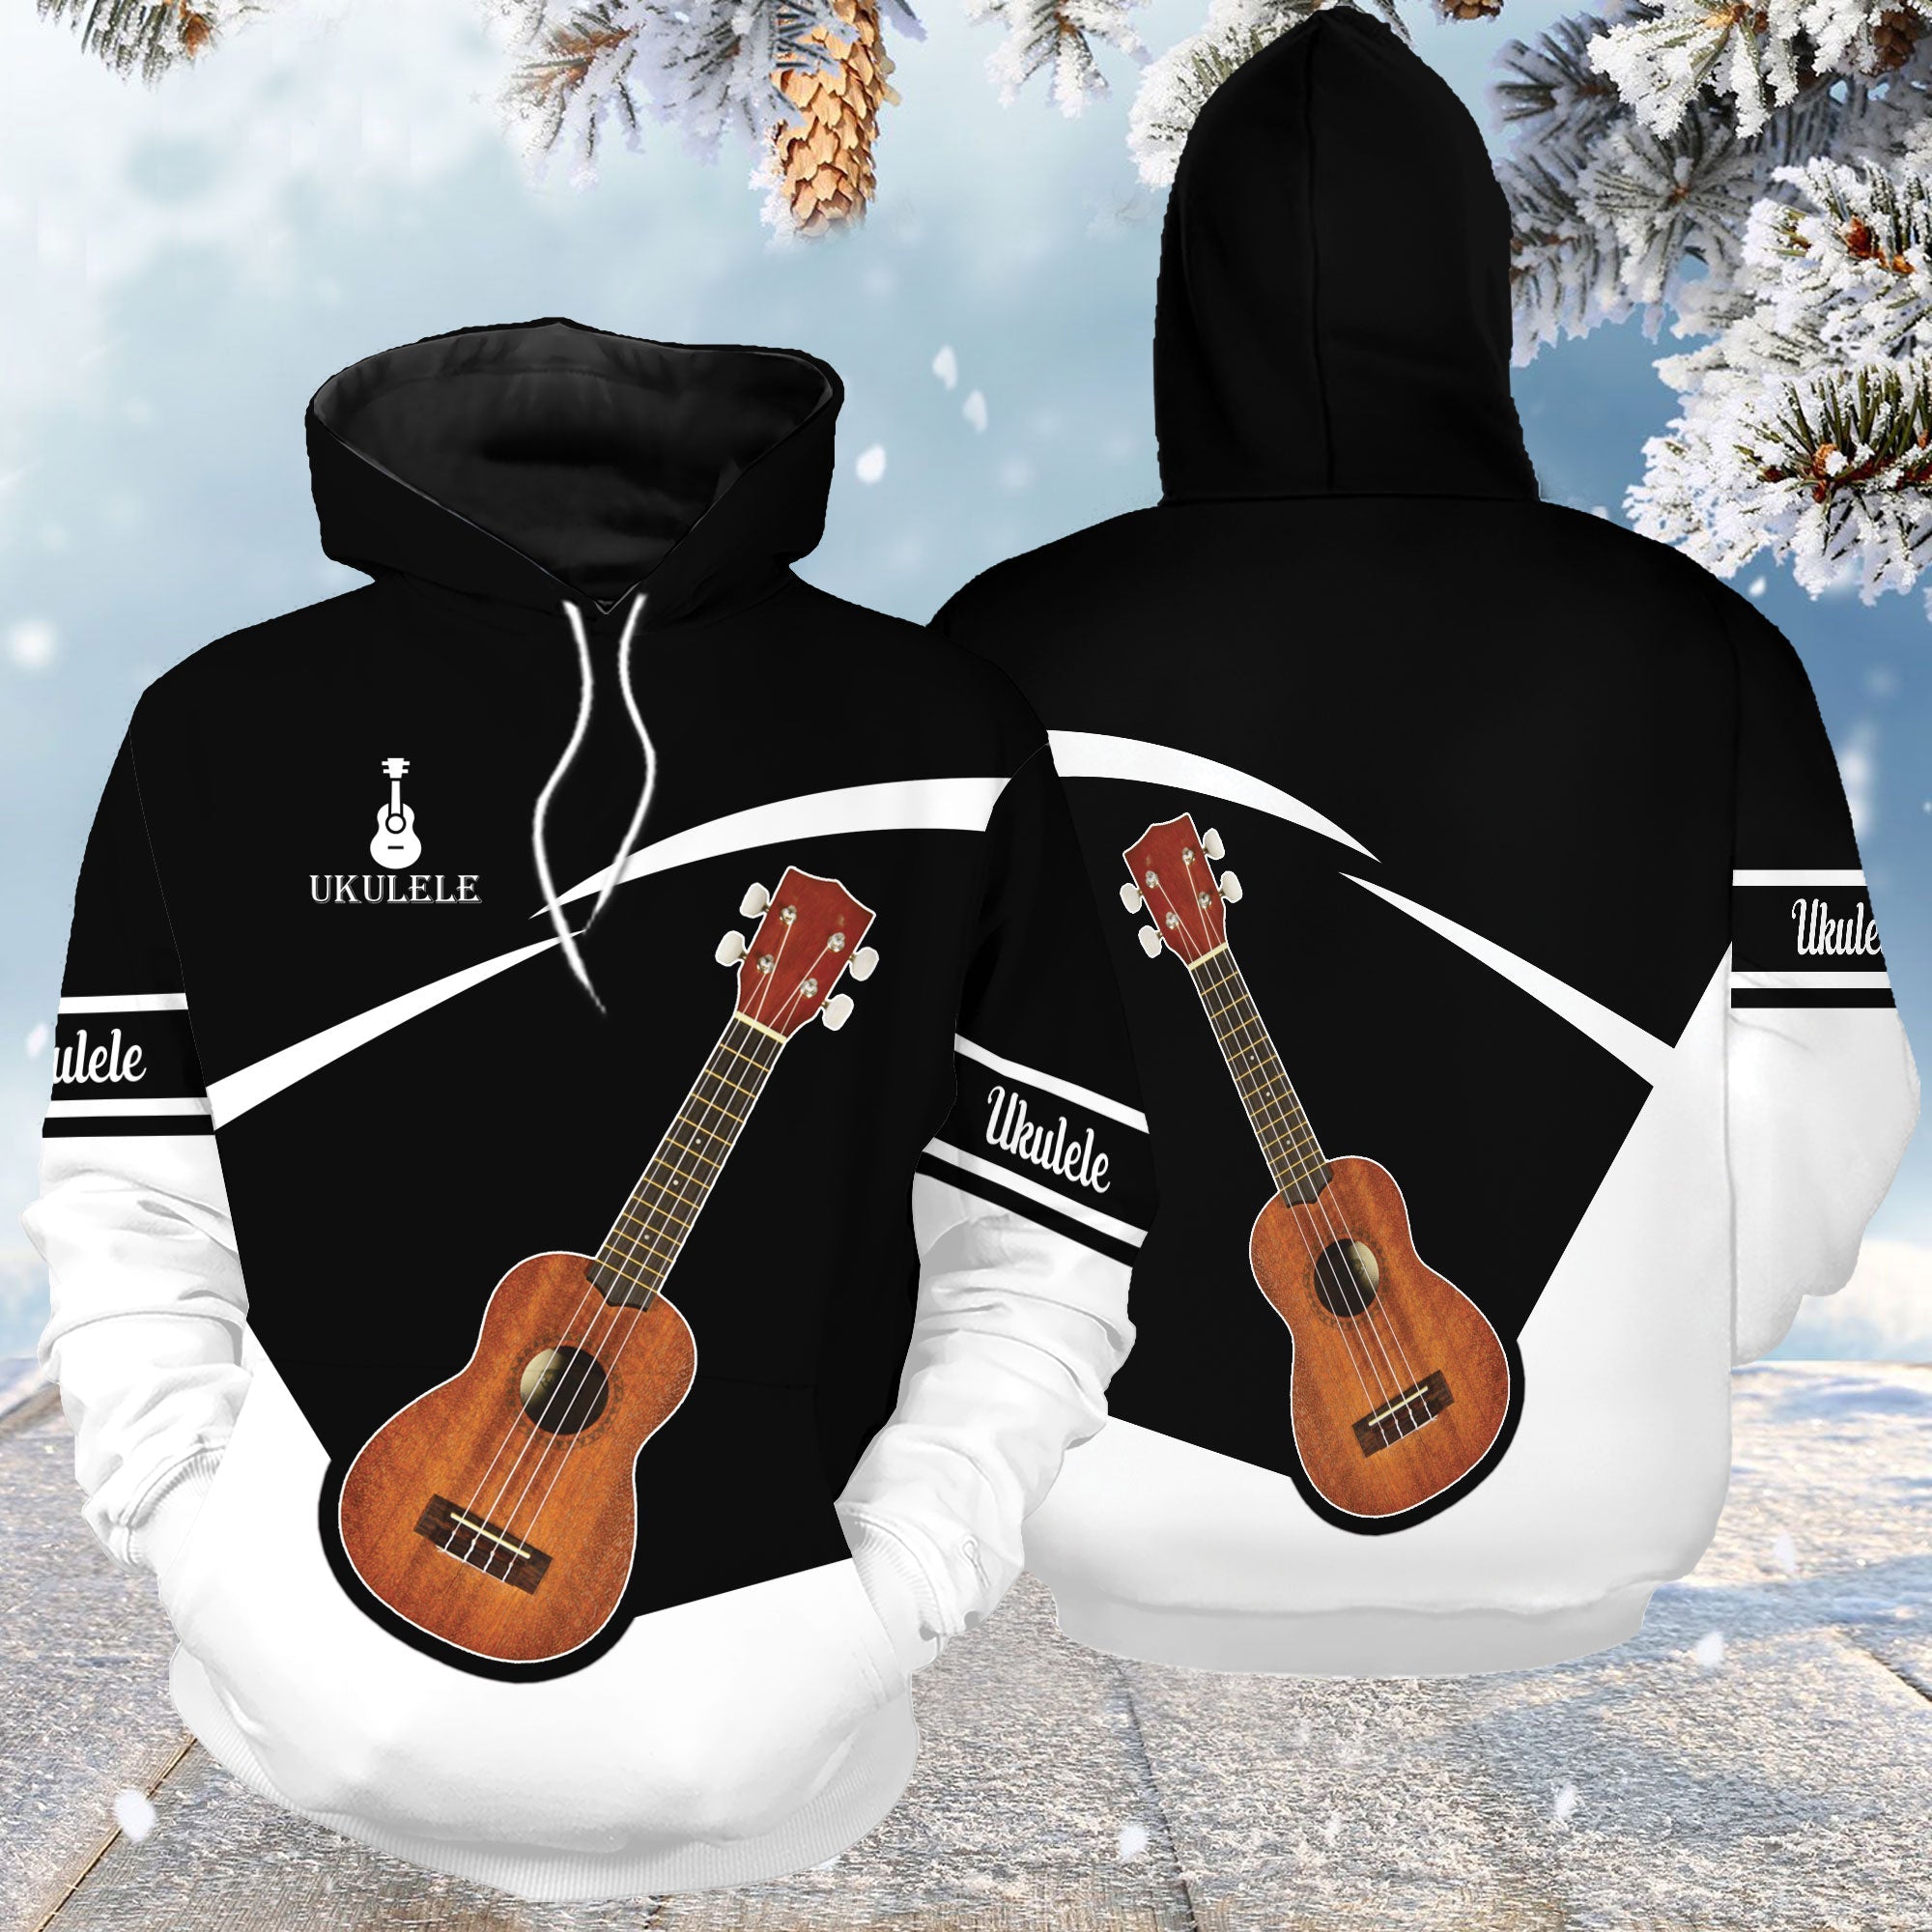 Ukulele Black White Pullover Premium Hoodie, Perfect Outfit For Men And Women On Christmas New Year Autumn Winter